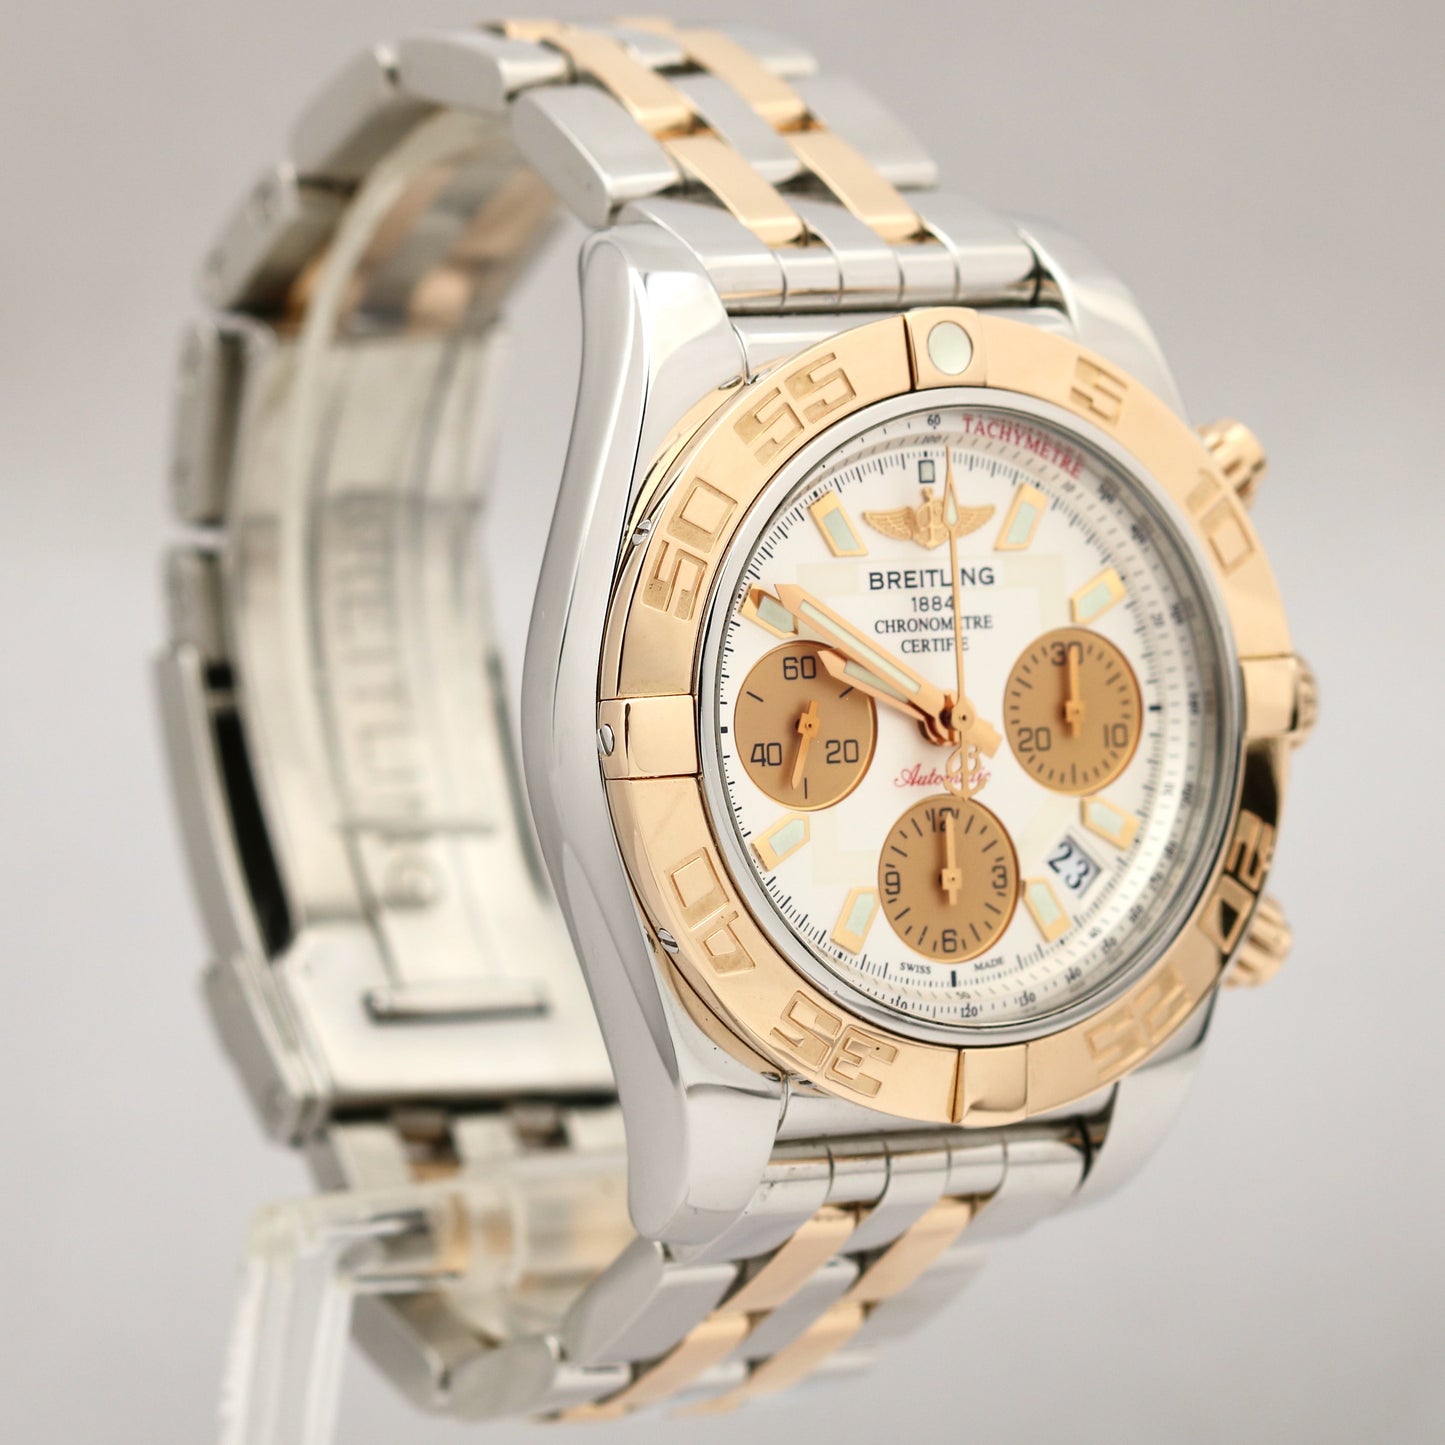 Breitling Chronomat Chronograph 41mm Silver 18K Rose Gold Two-Tone Watch CB0140